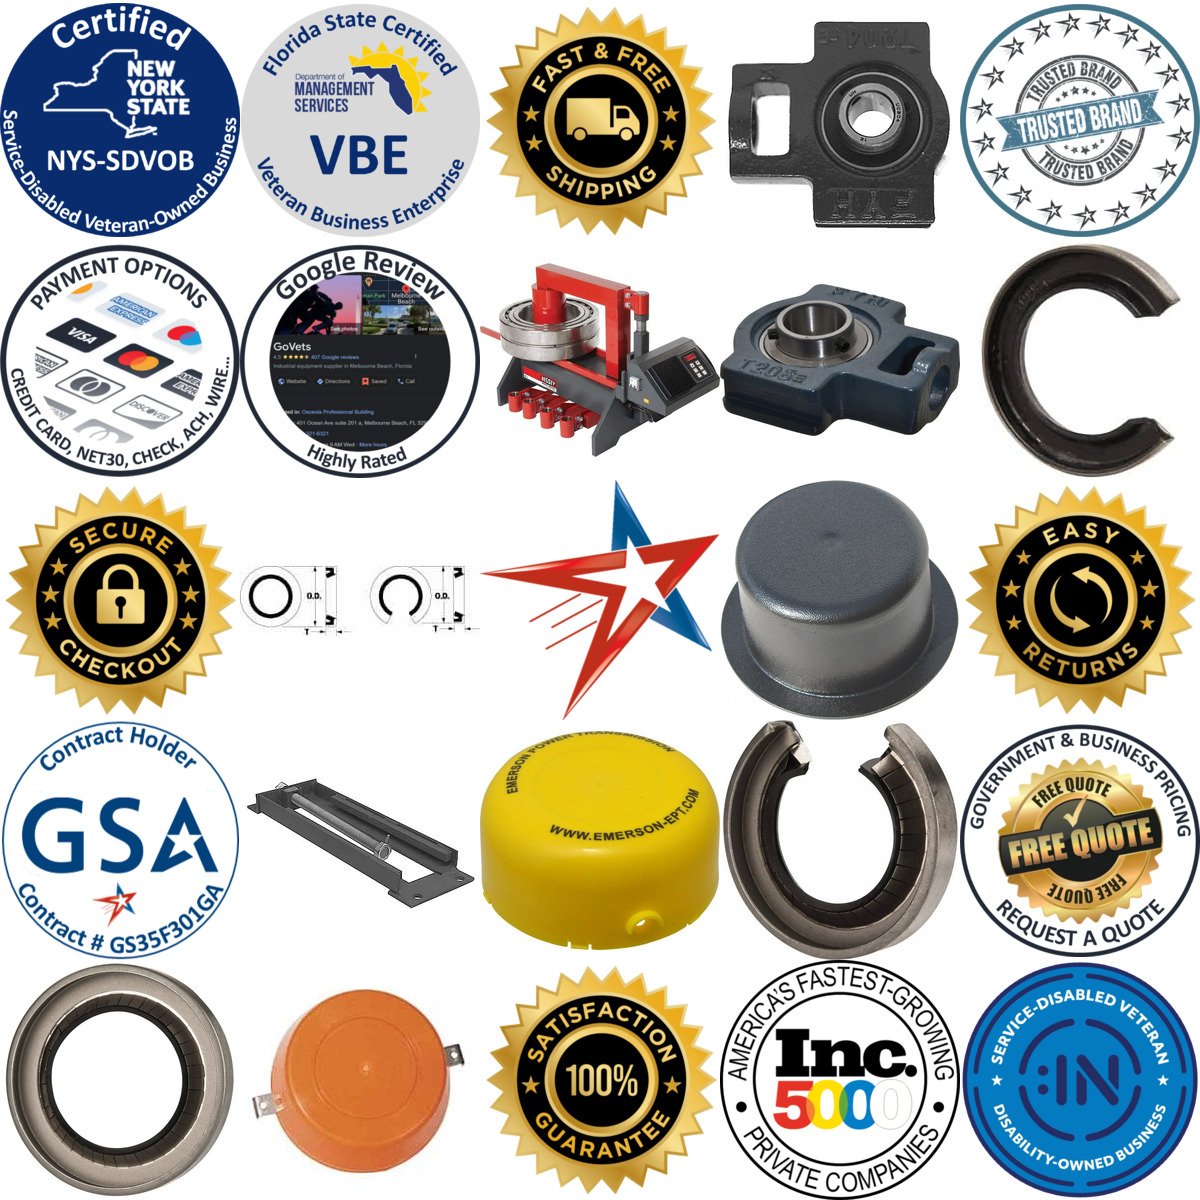 A selection of Bearing Parts and Accessories products on GoVets